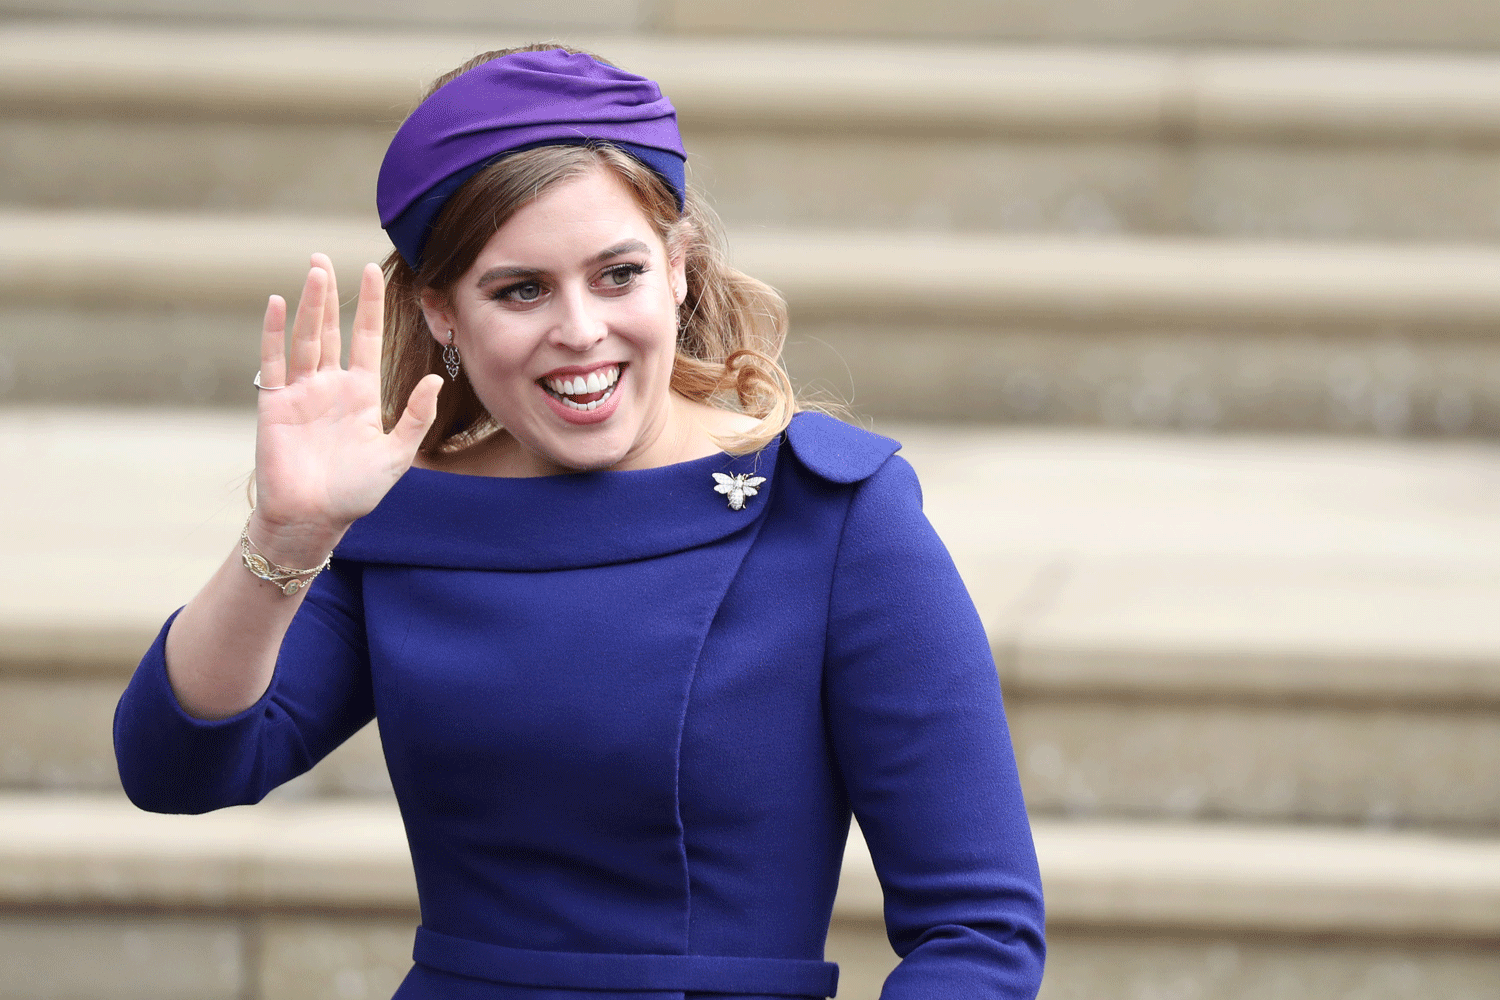 Is This The Tiara Princess Beatrice Will Wear On Her Wedding Day?